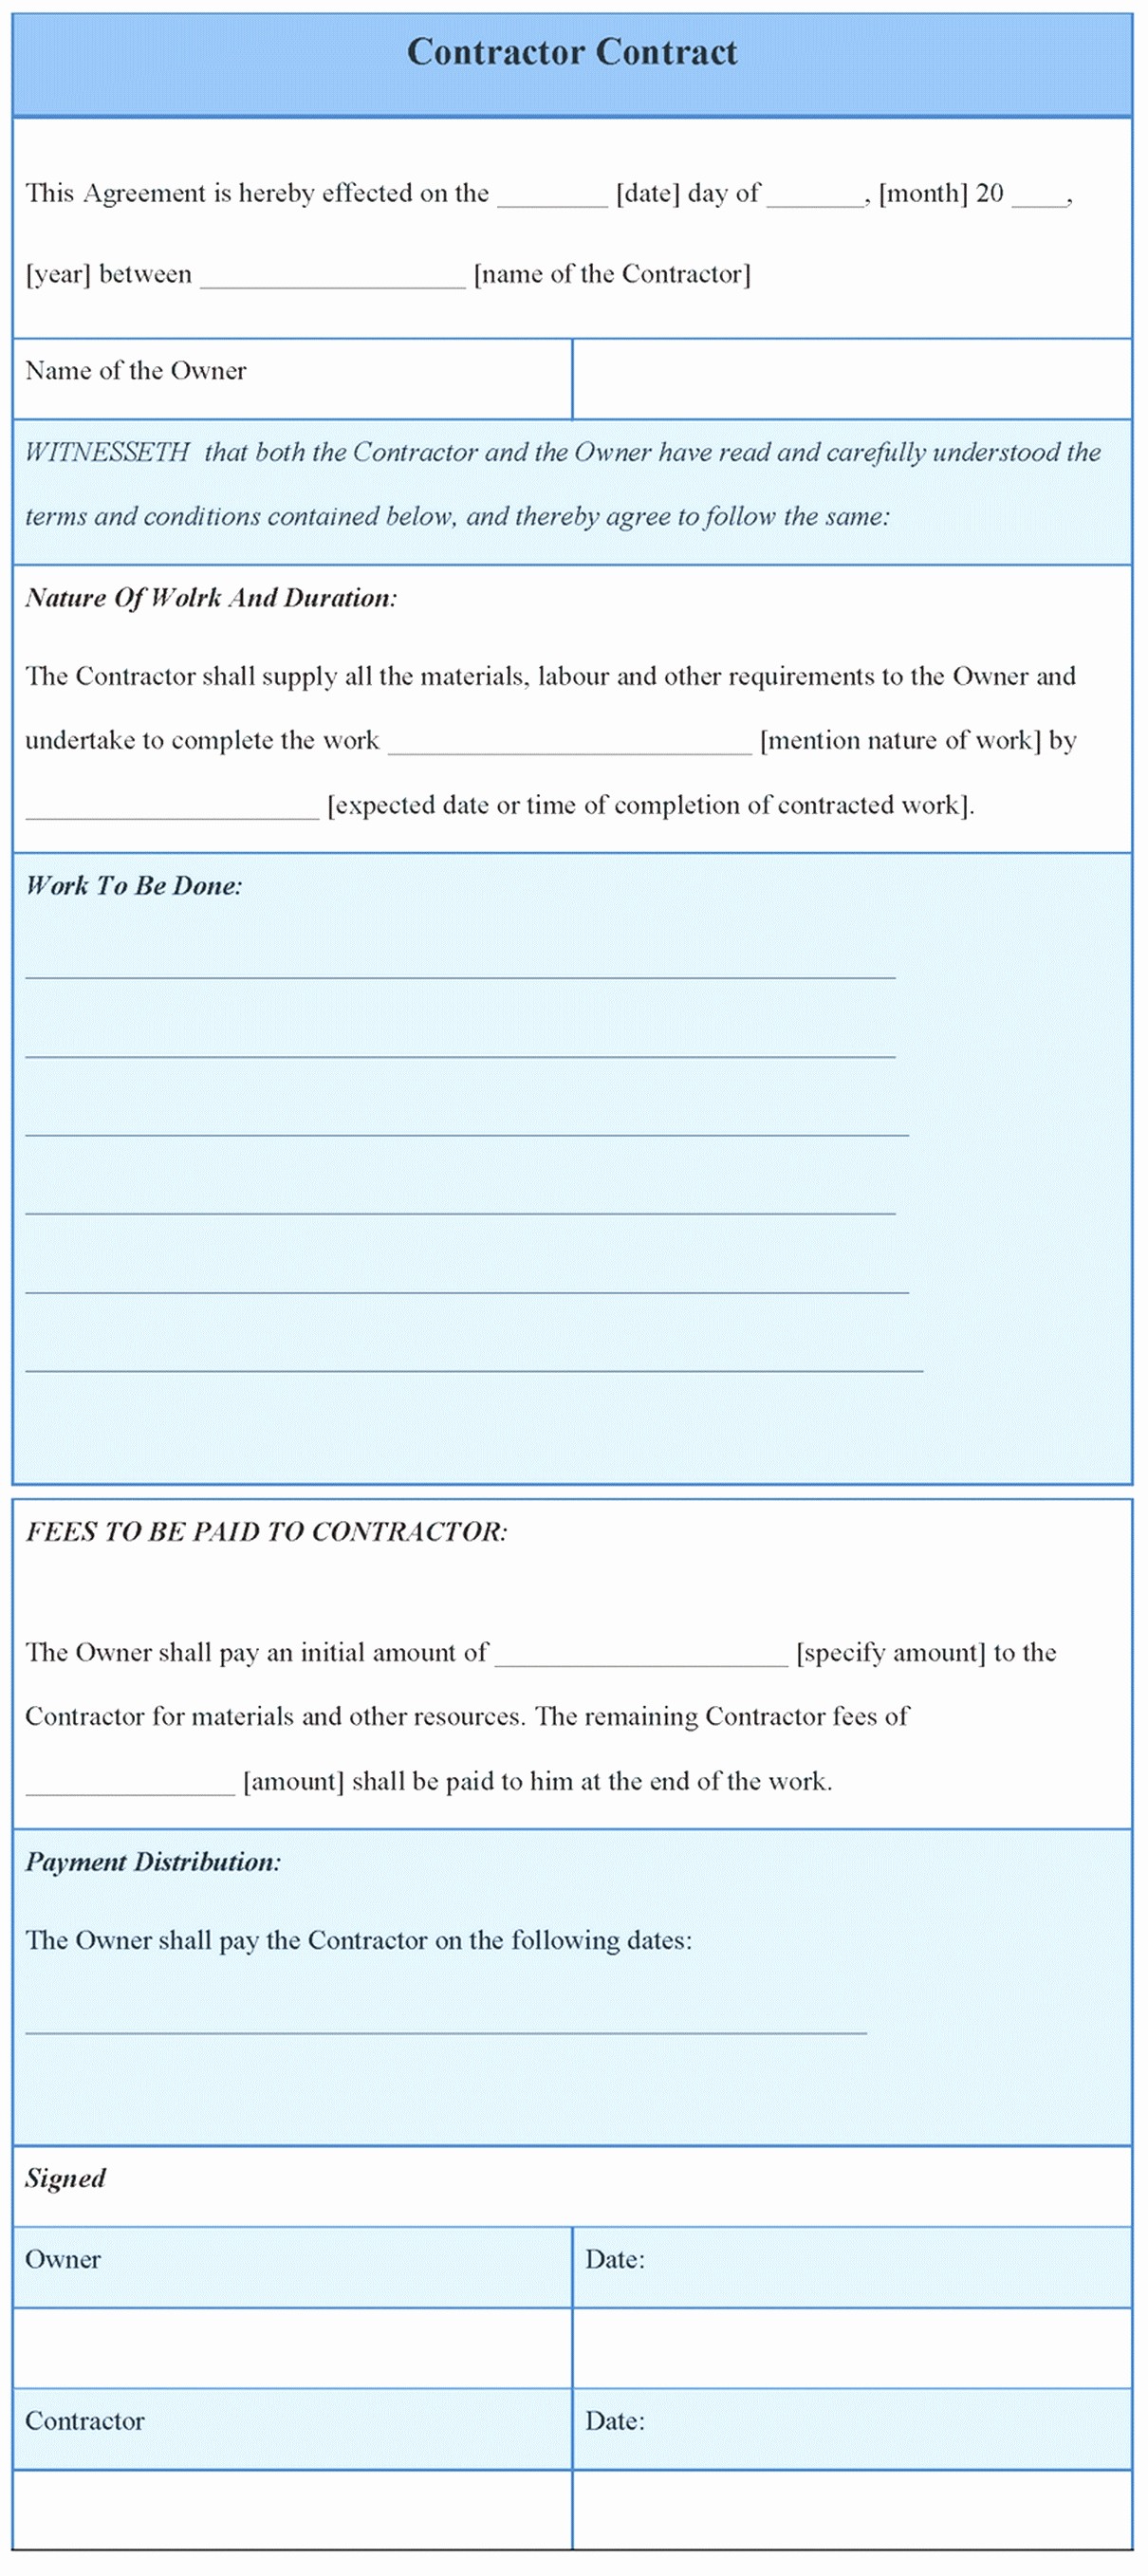 Microsoft Access Contract Management Template Inspirational